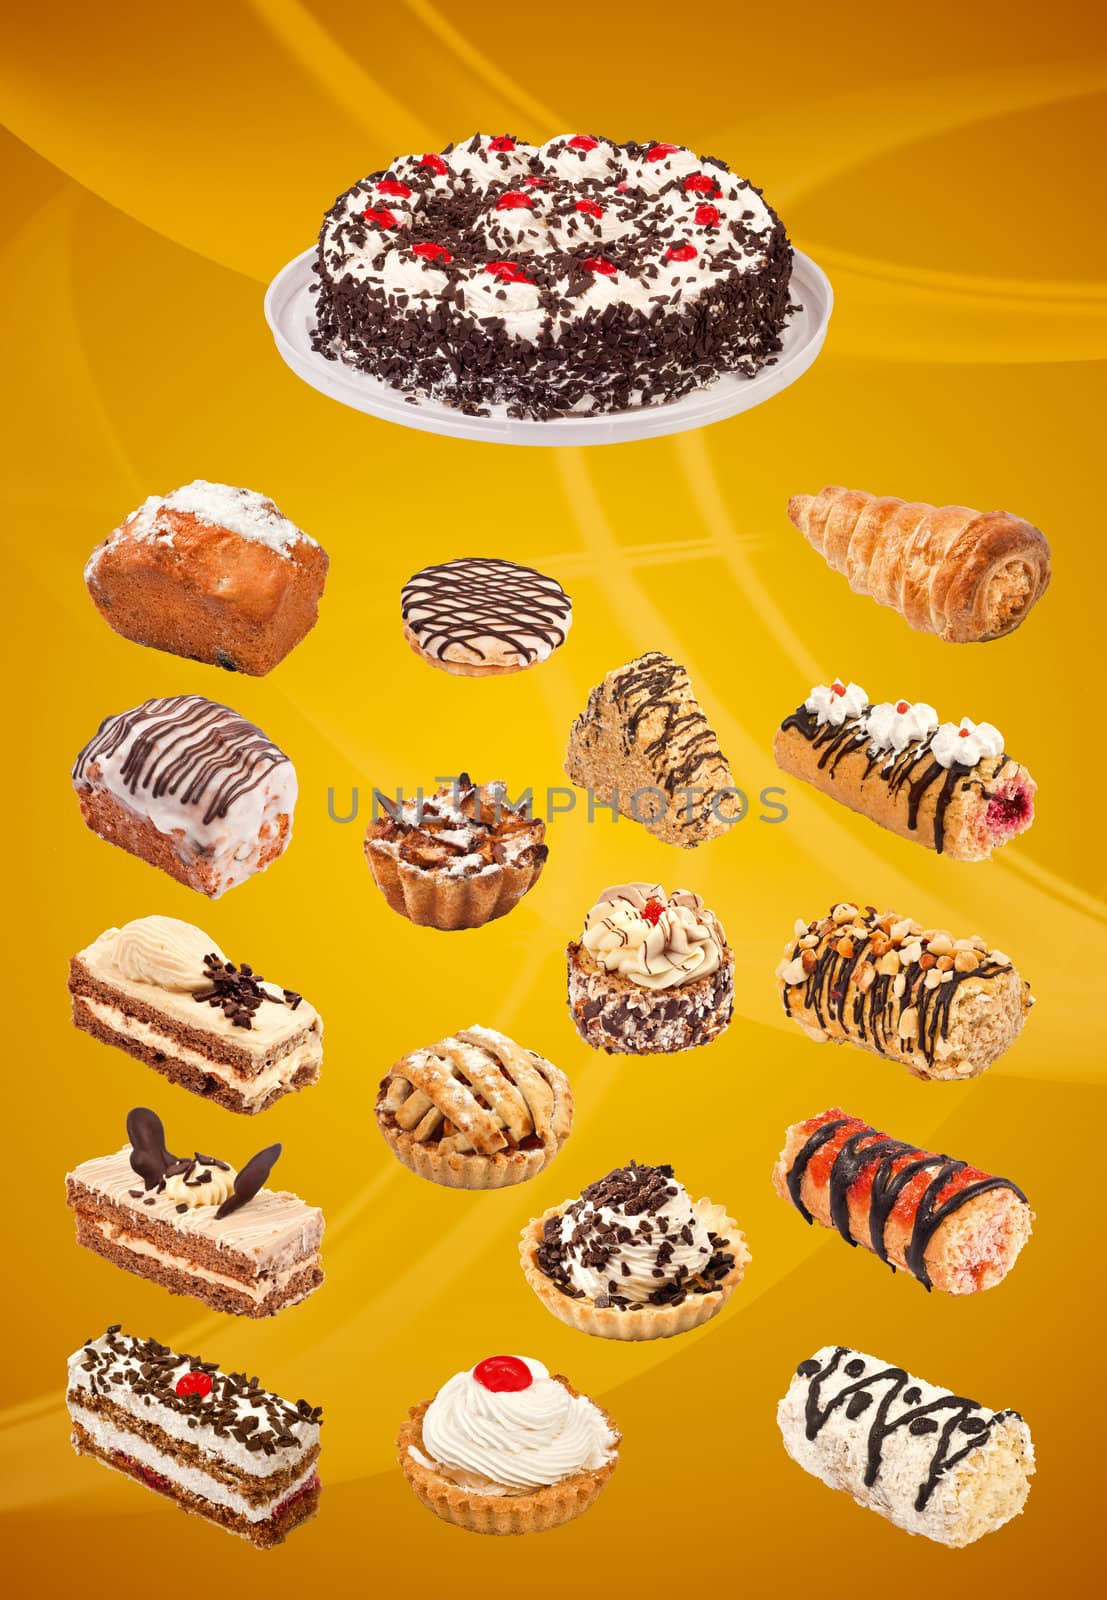 Collage of cakes by igor_stramyk